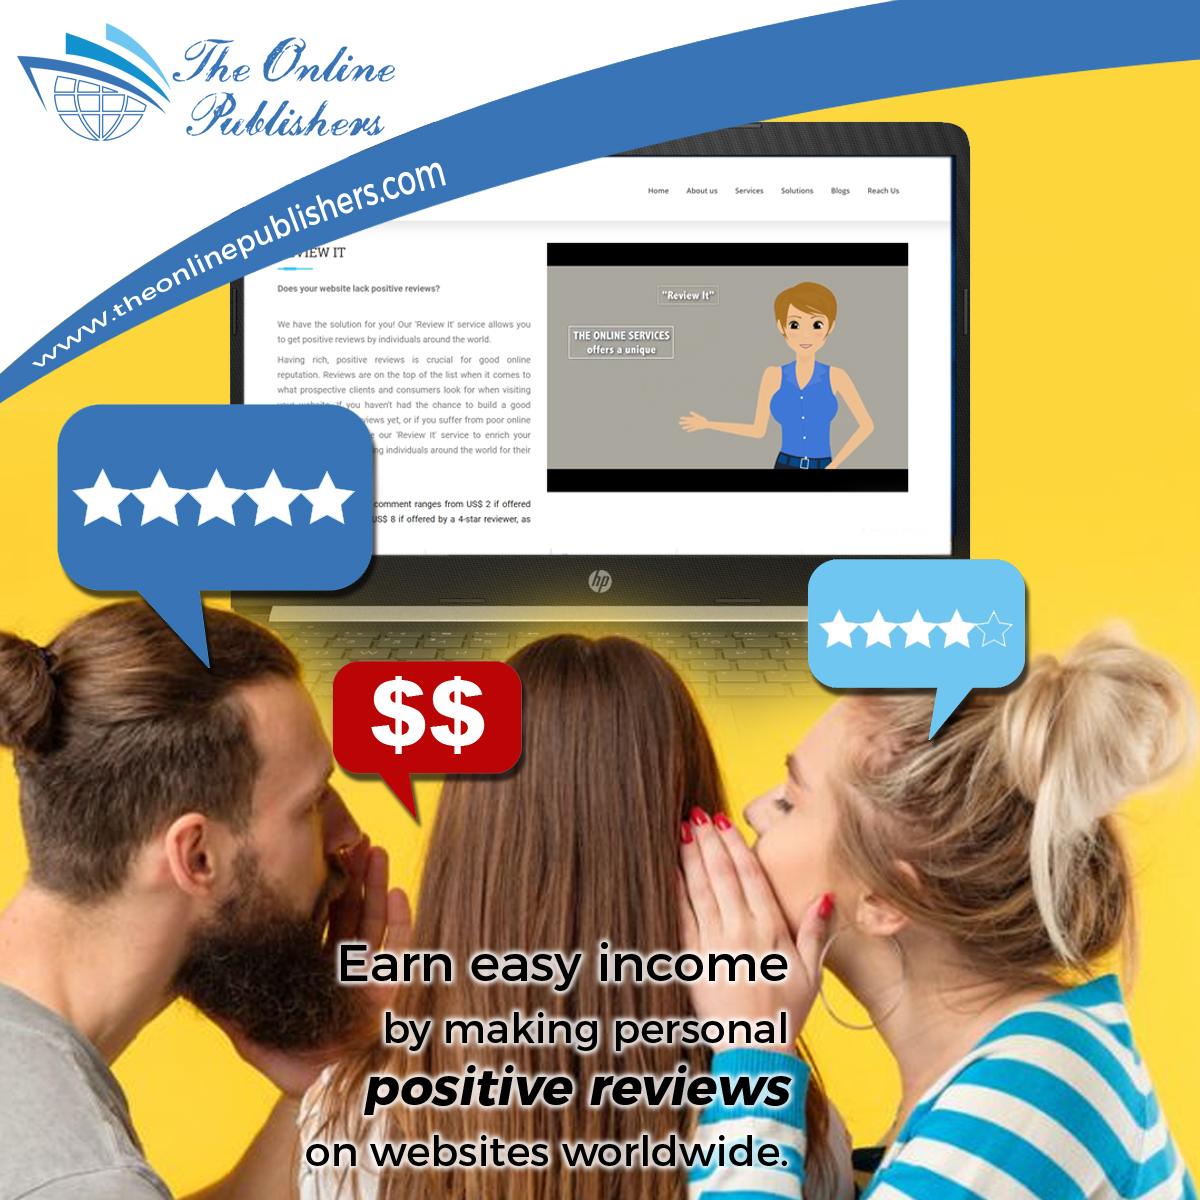 The Fun In Earning With Online Reviews